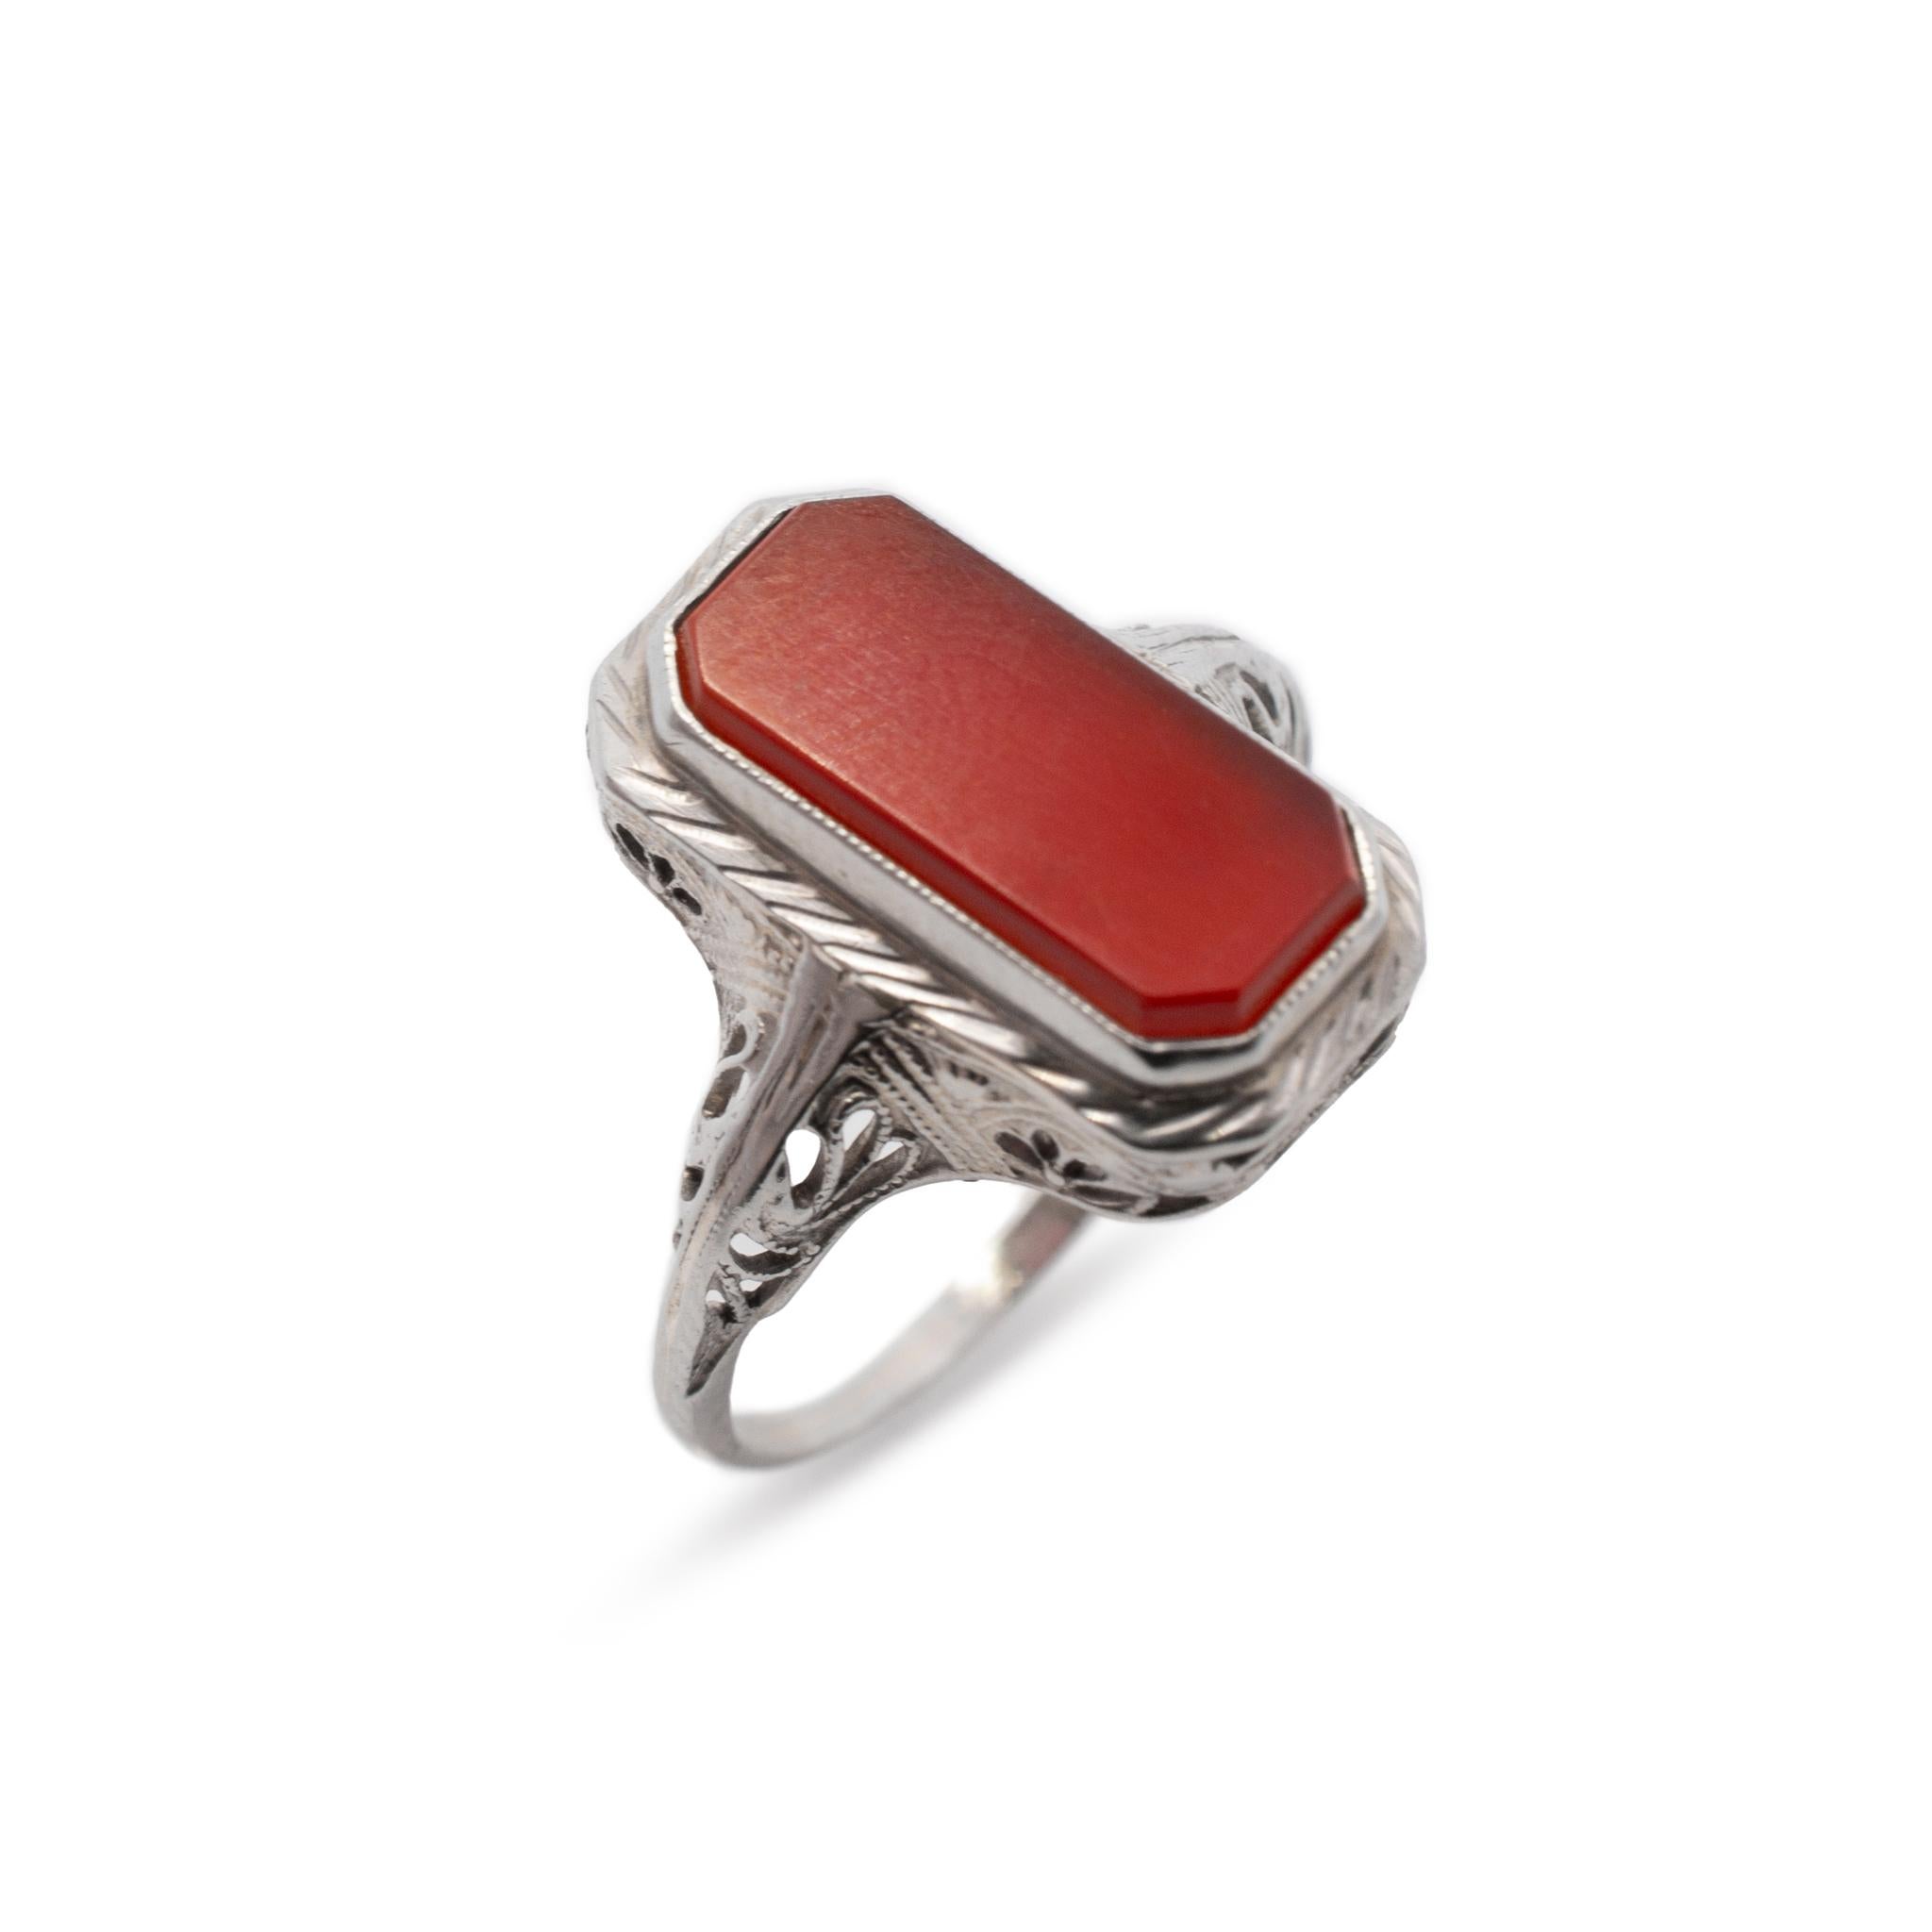 Gender: Ladies

Metal Type: 14k White Gold

Size: 7

Weight: 2.80 Grams

This antique ring is made of 14K white gold with an orange sunstone as a center piece.

Pre-owned in excellent condition. Might show minor signs of wear.

One (1) natural,